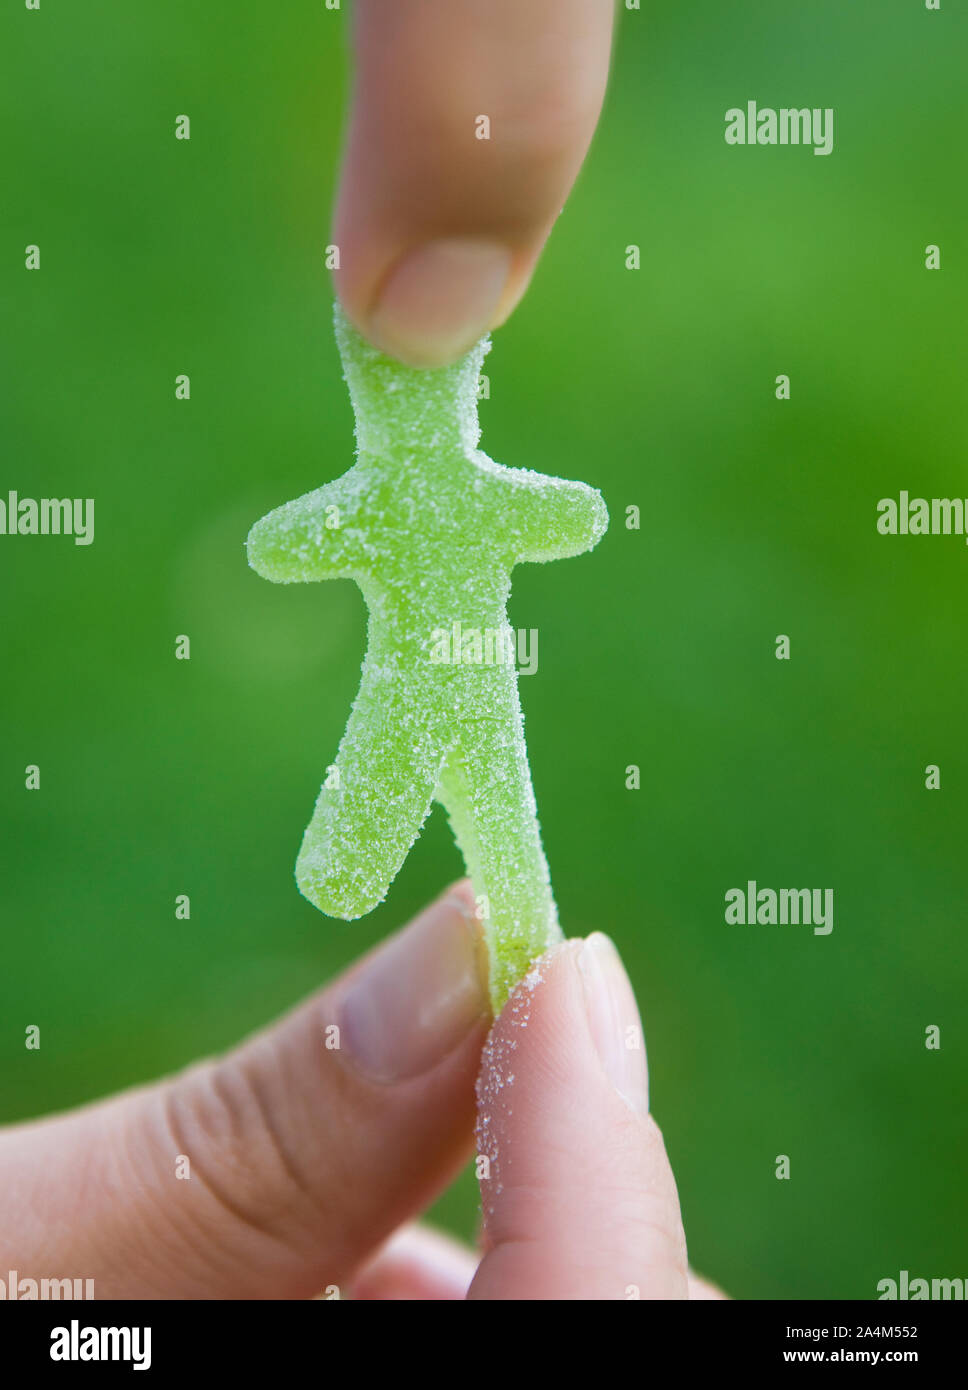 Womans hands holding green jelly man Stock Photo